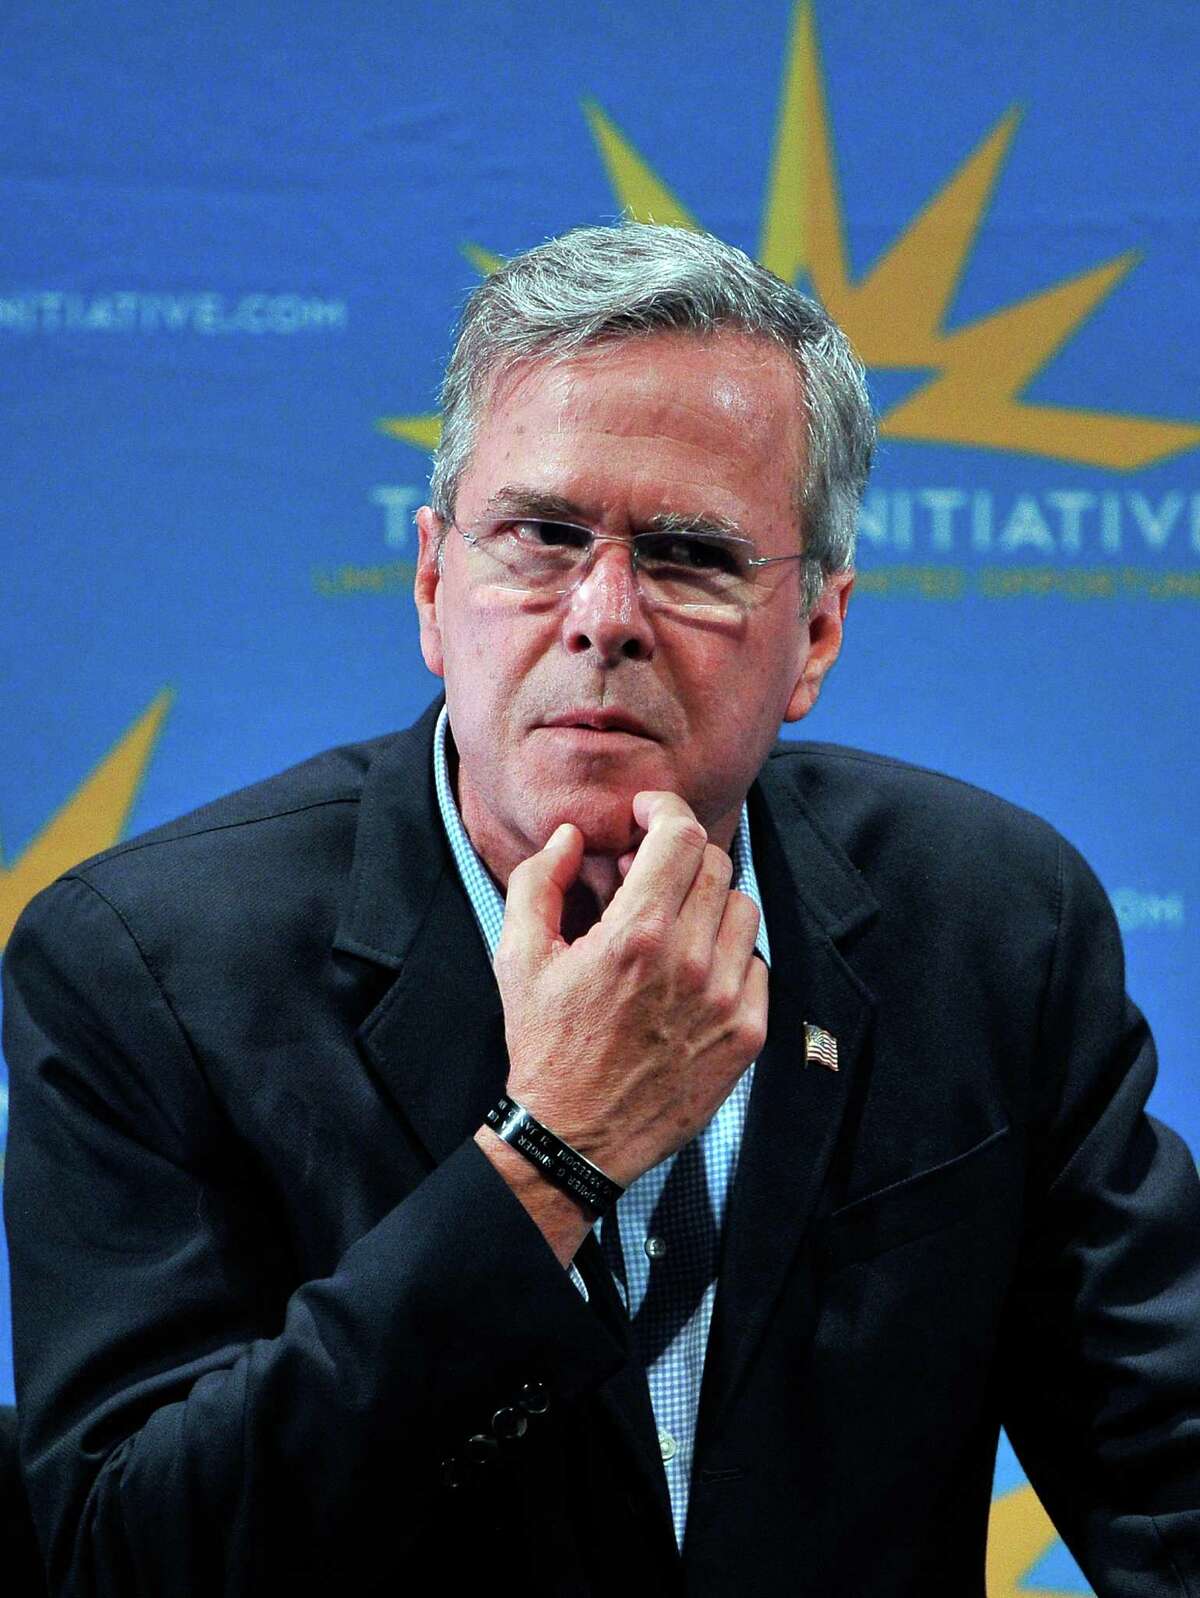 GOP presidential candidate Jeb Bush said Thursday several communities in Texas would be interested in locating nuclear waste sites in their area.